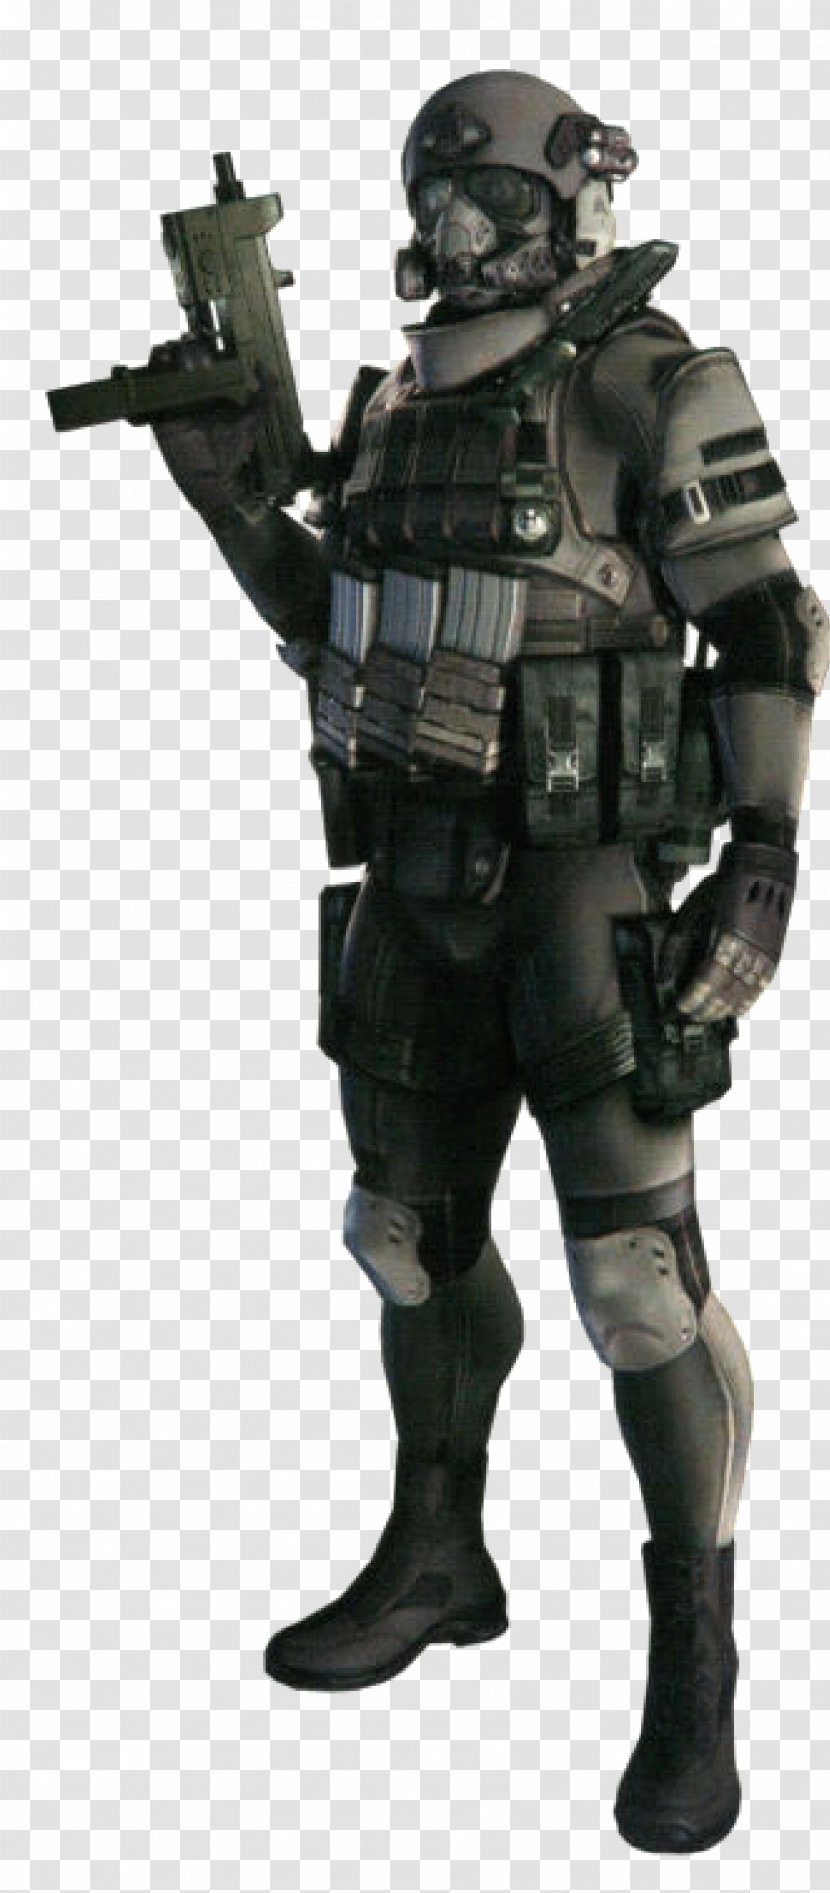 Gear Background - Game - Swat Costume Transparent PNG